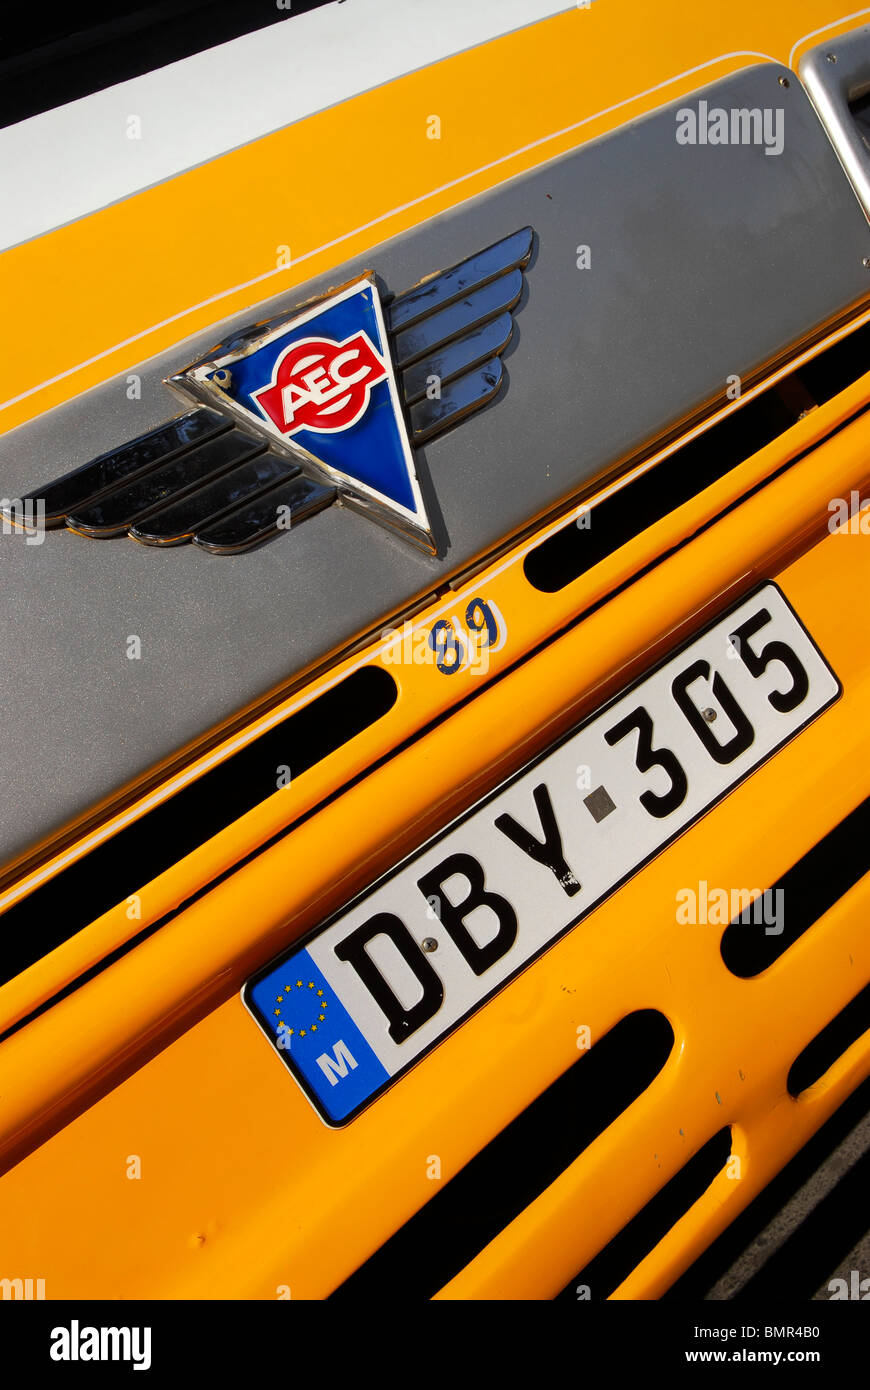 Public transport bus and licence plate in Valletta, Malta. Stock Photo